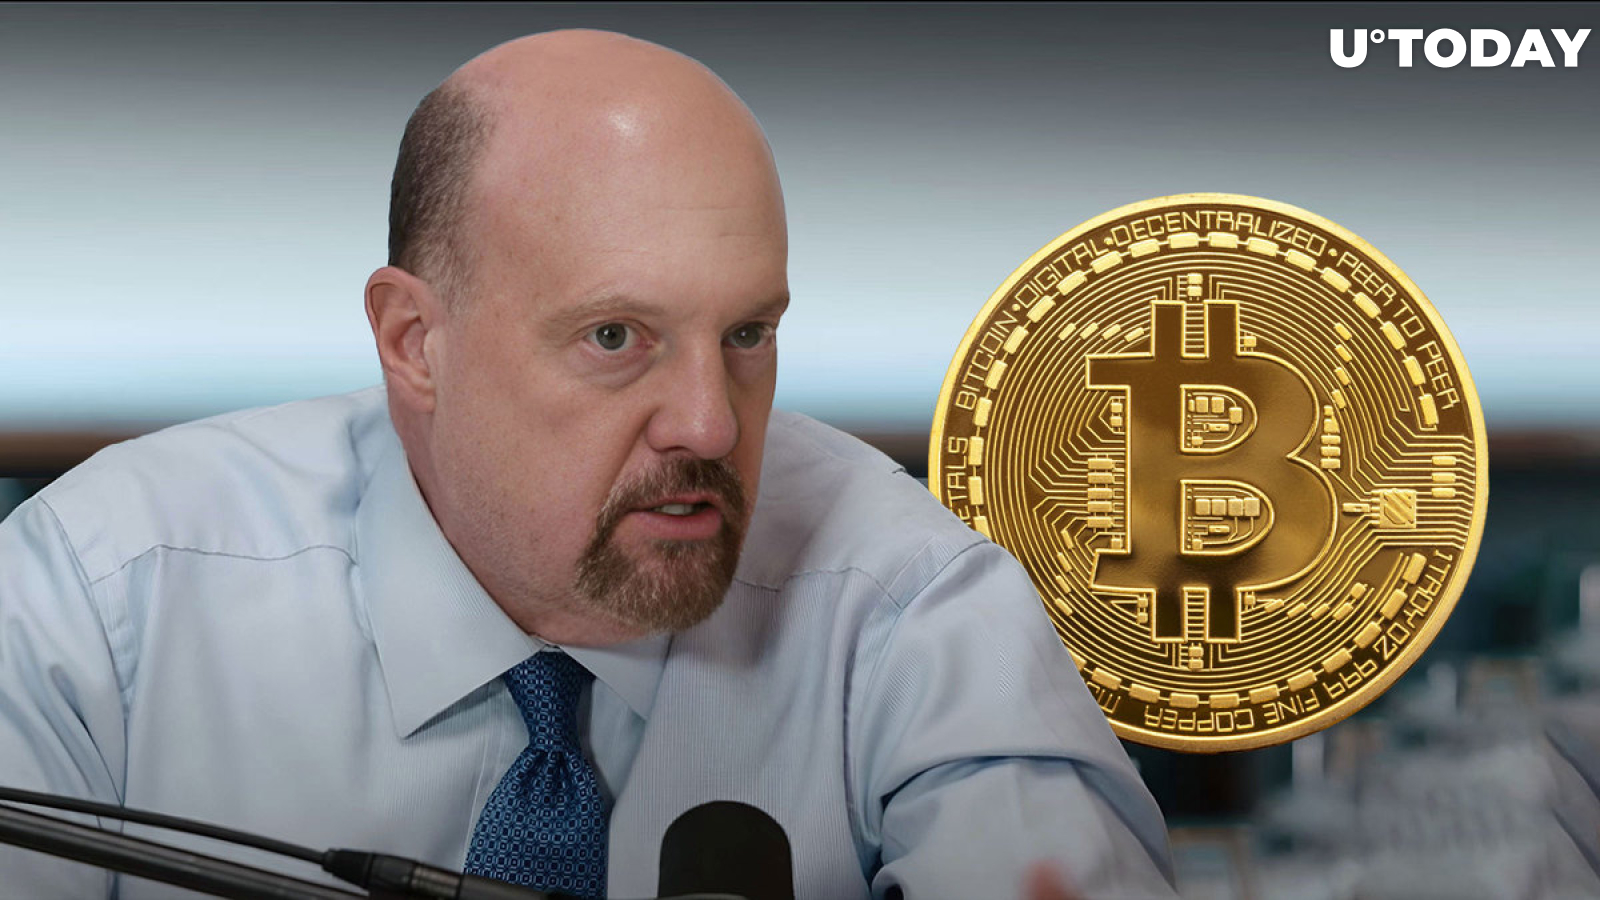 Bitcoin (BTC) Price Goes Green Amid Cold Call From CNBC's Jim Cramer